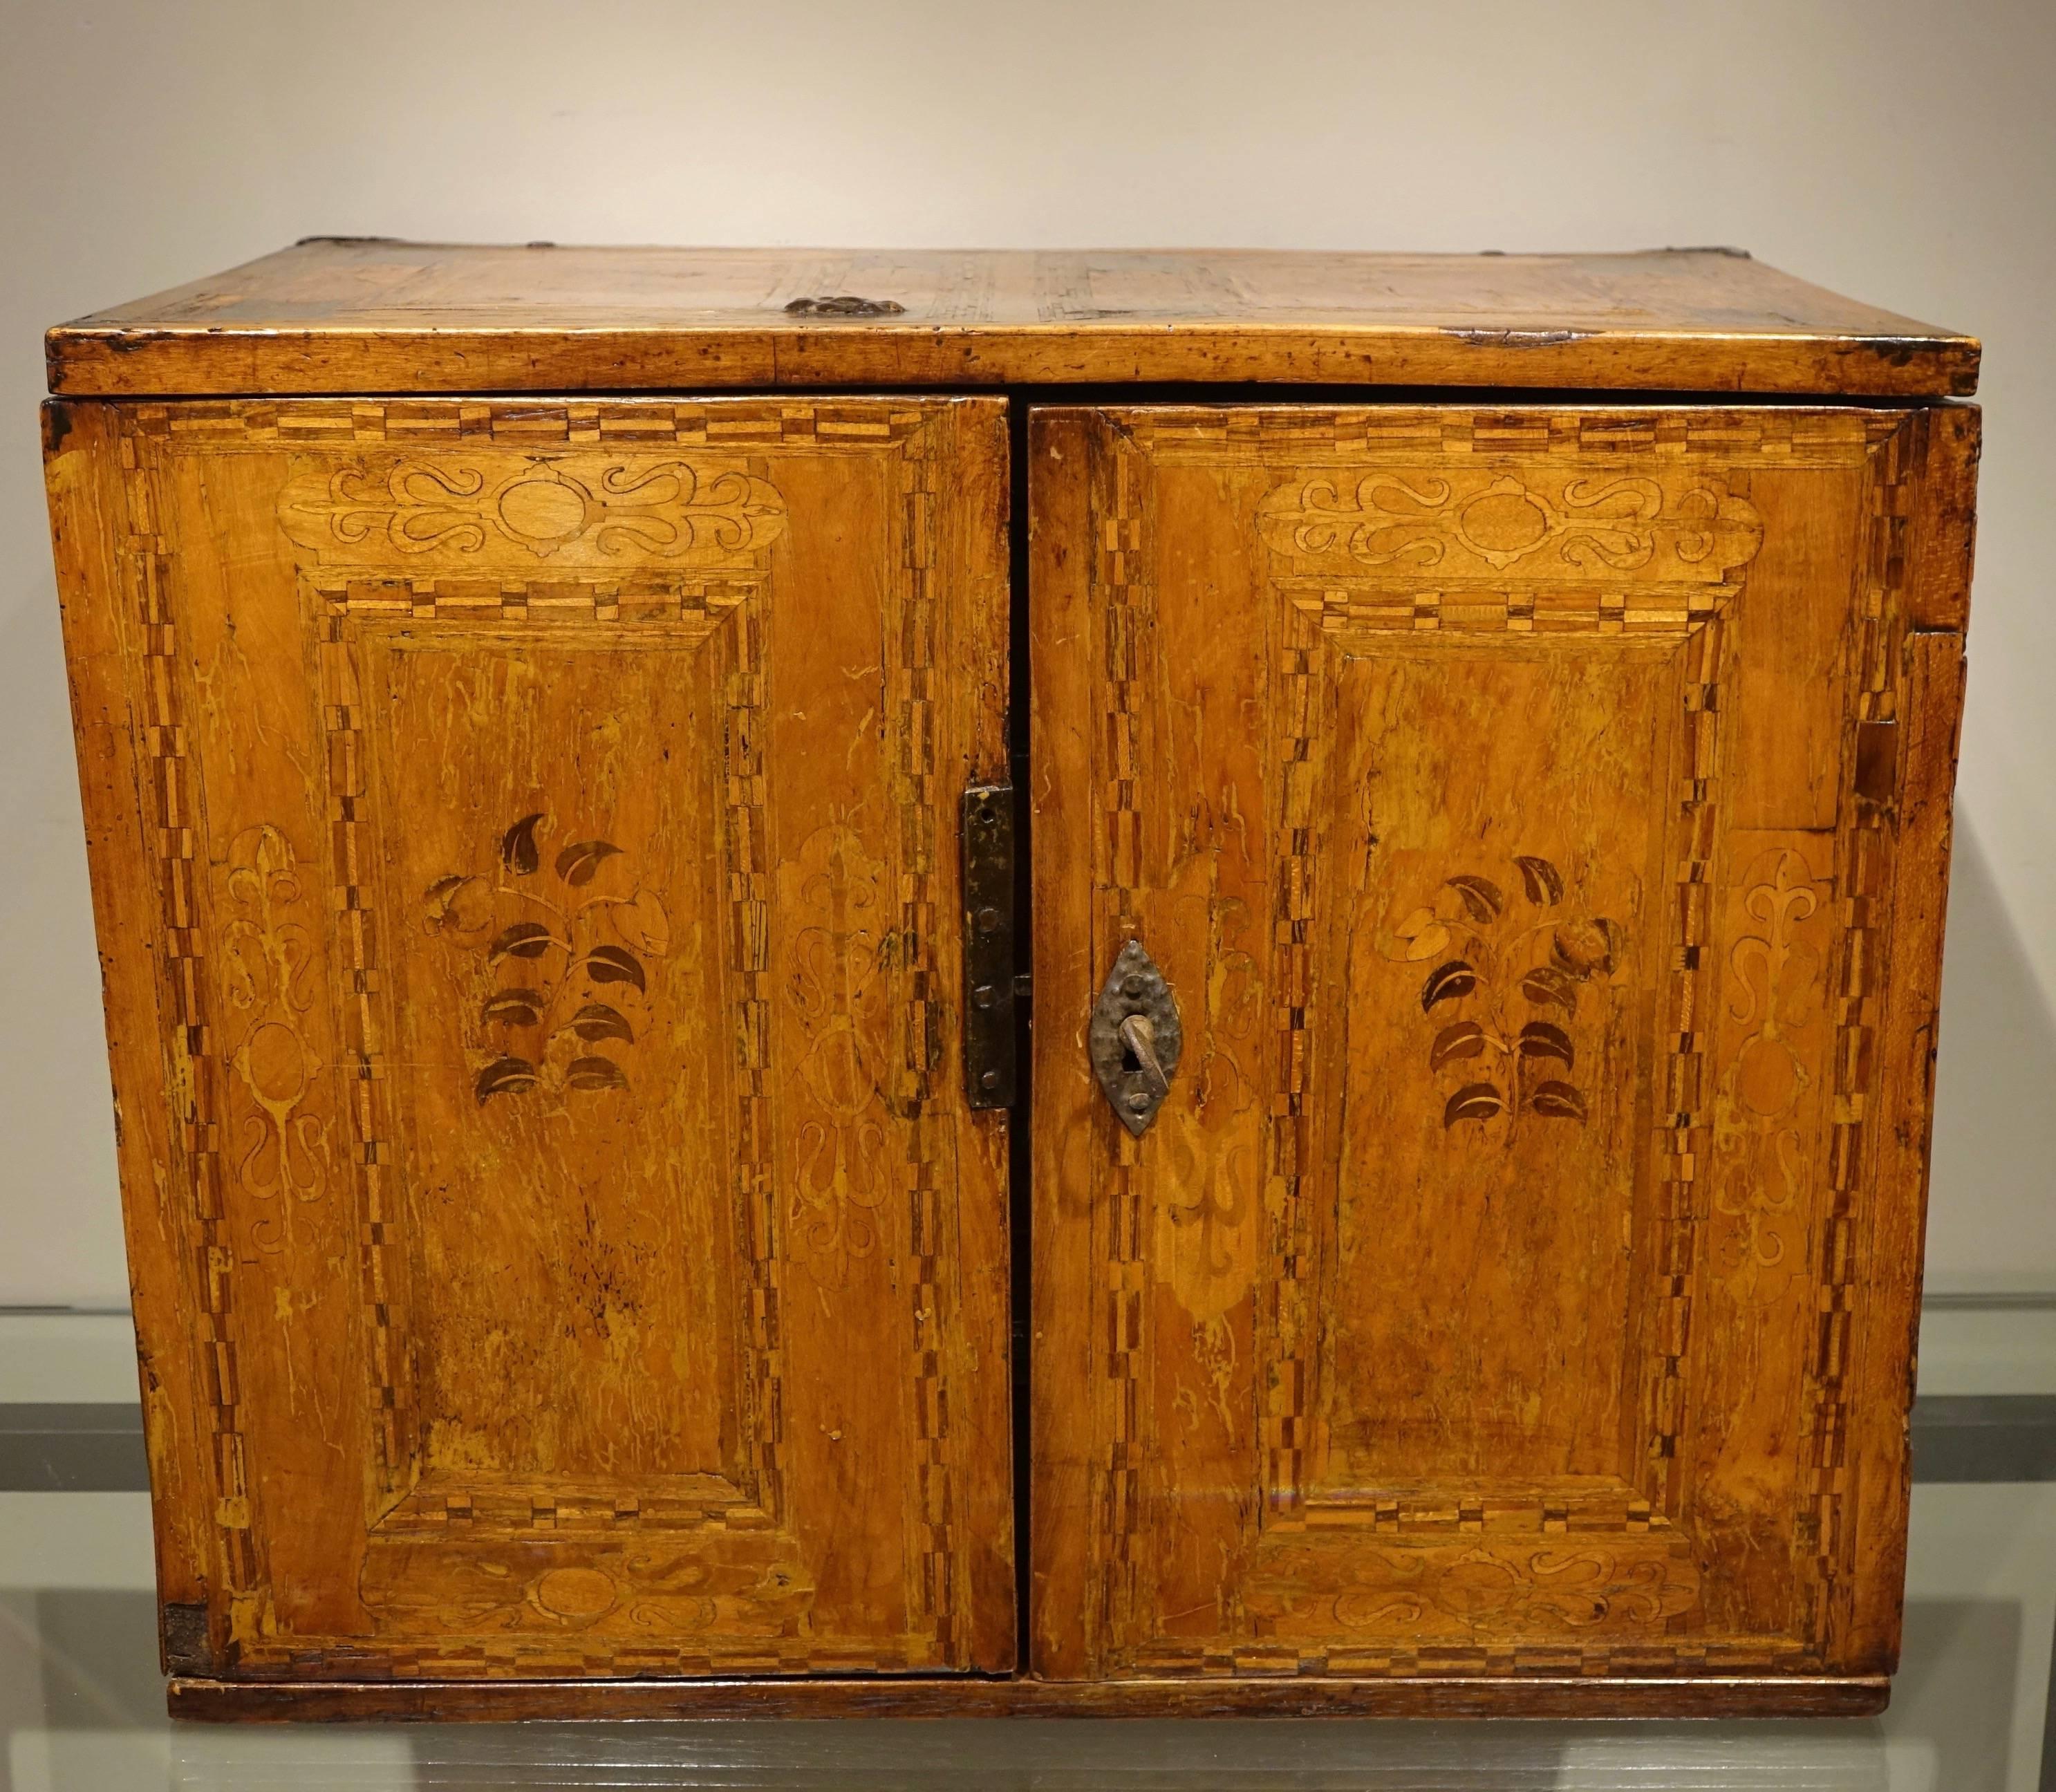 Kabinettschrank decorated with floral and architectural motifs, inlaid in intarsia.
Two doors open on a series of seven drawers, two of which are fake and are part of the top belt concealing the top of the cabinet.
Beautiful locks with clapper,